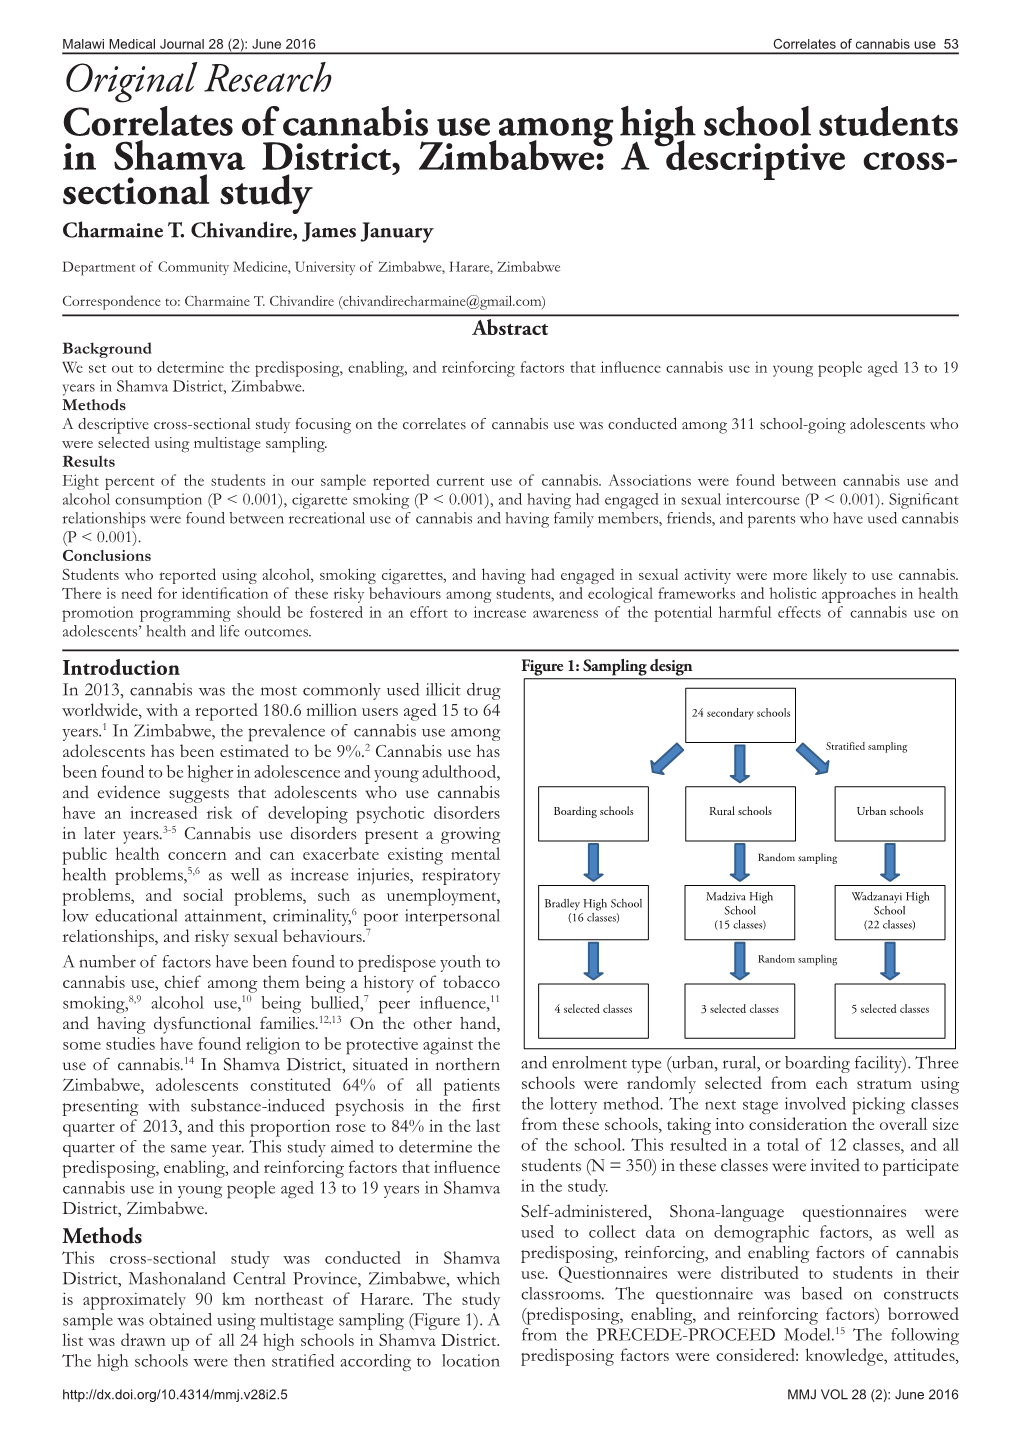 Original Research Correlates of Cannabis Use Among High School Students in Shamva District, Zimbabwe: a Descriptive Cross- Sectional Study Charmaine T